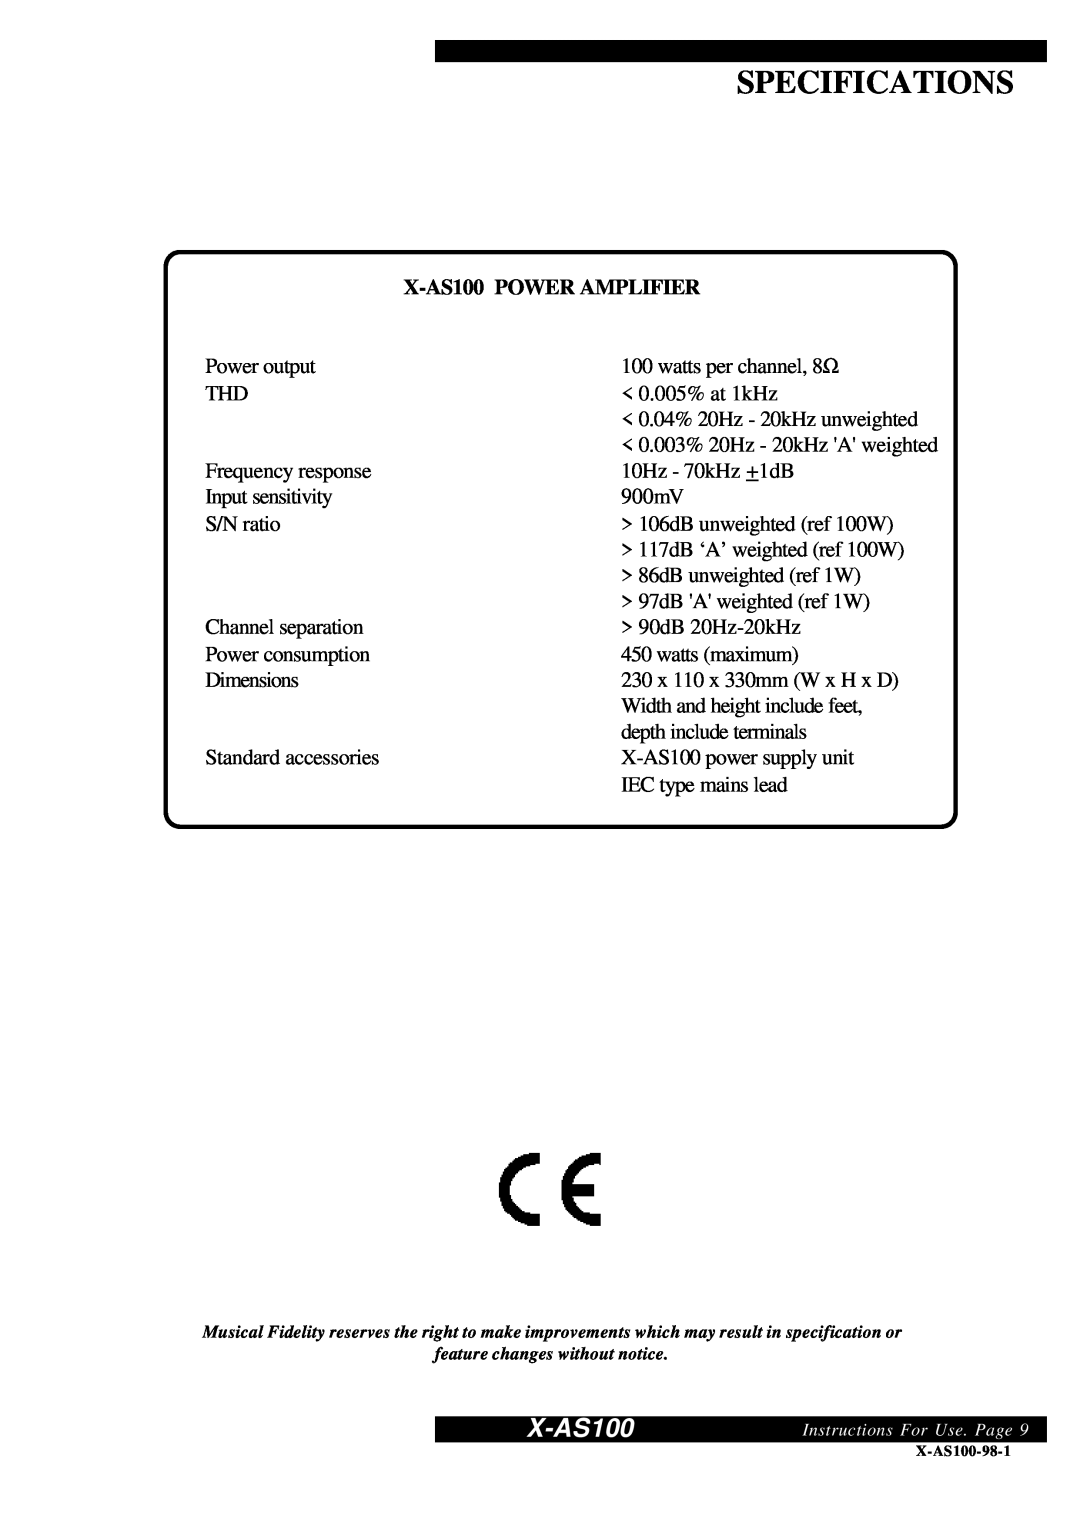 Musical Fidelity manual Specifications, X-AS100POWER AMPLIFIER 